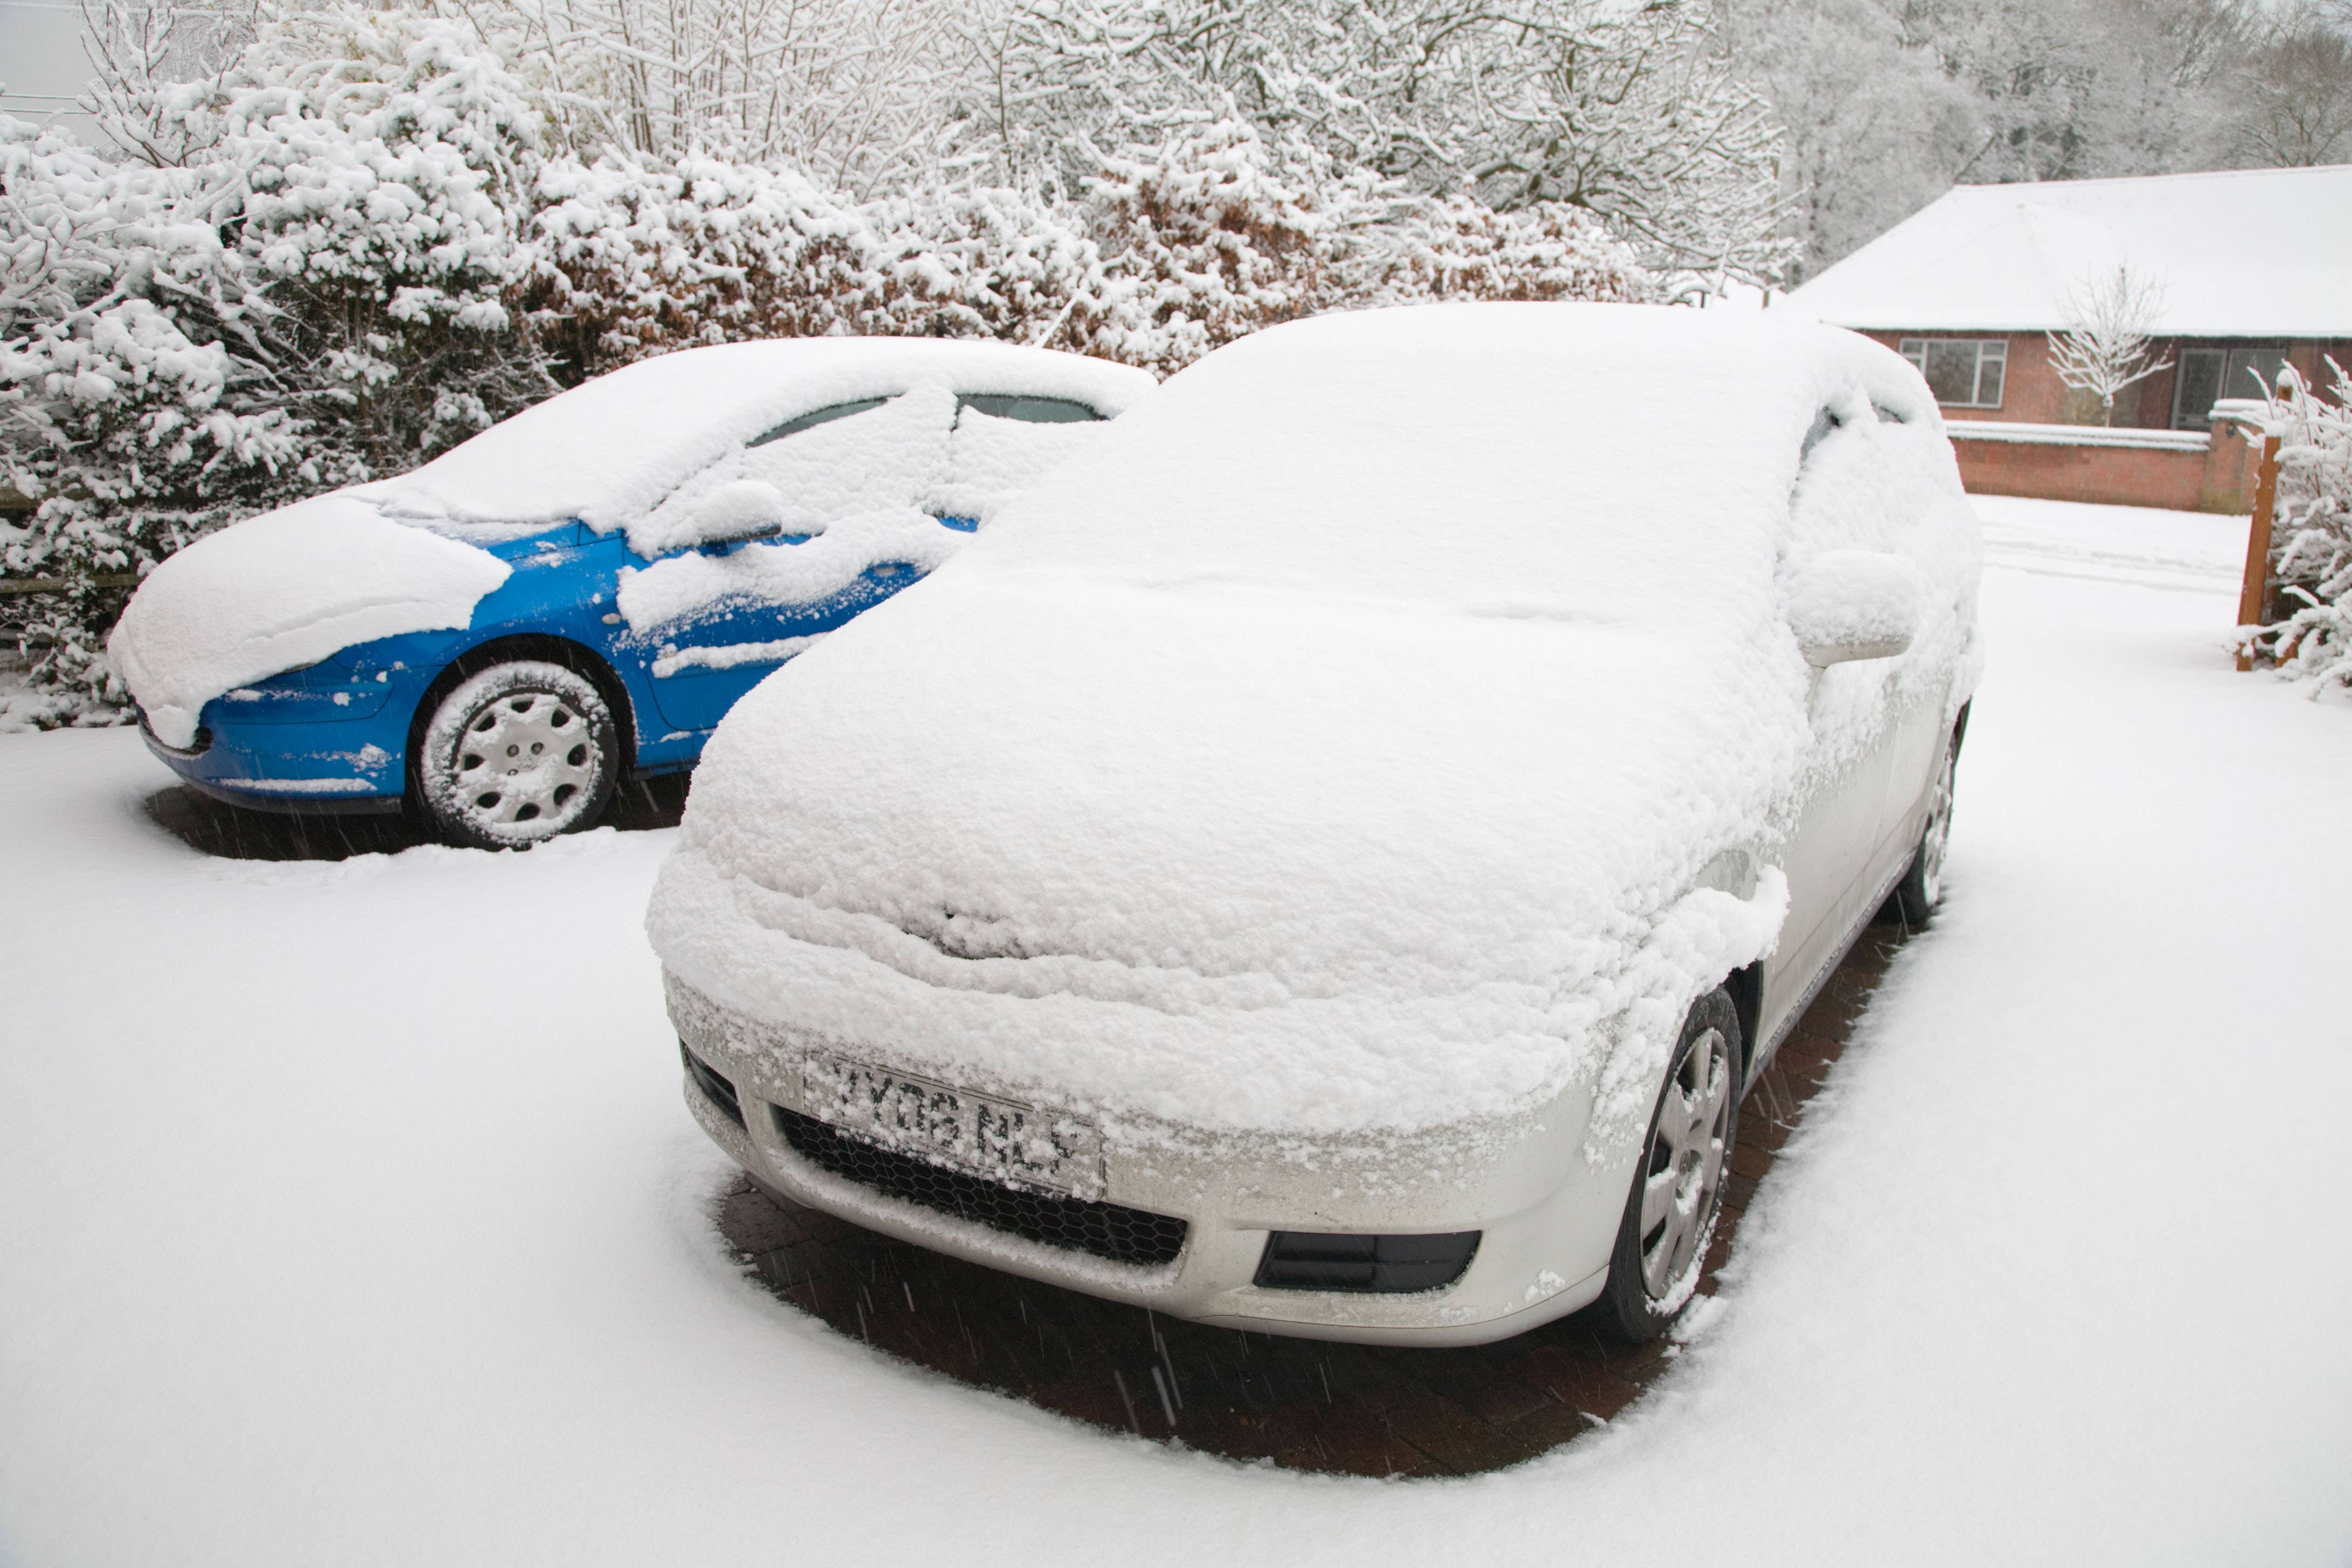 The Association of British Insurers is warning motorists not to leave vehicles unattended while they defrost with the keys in the ignition (Alamy/PA)